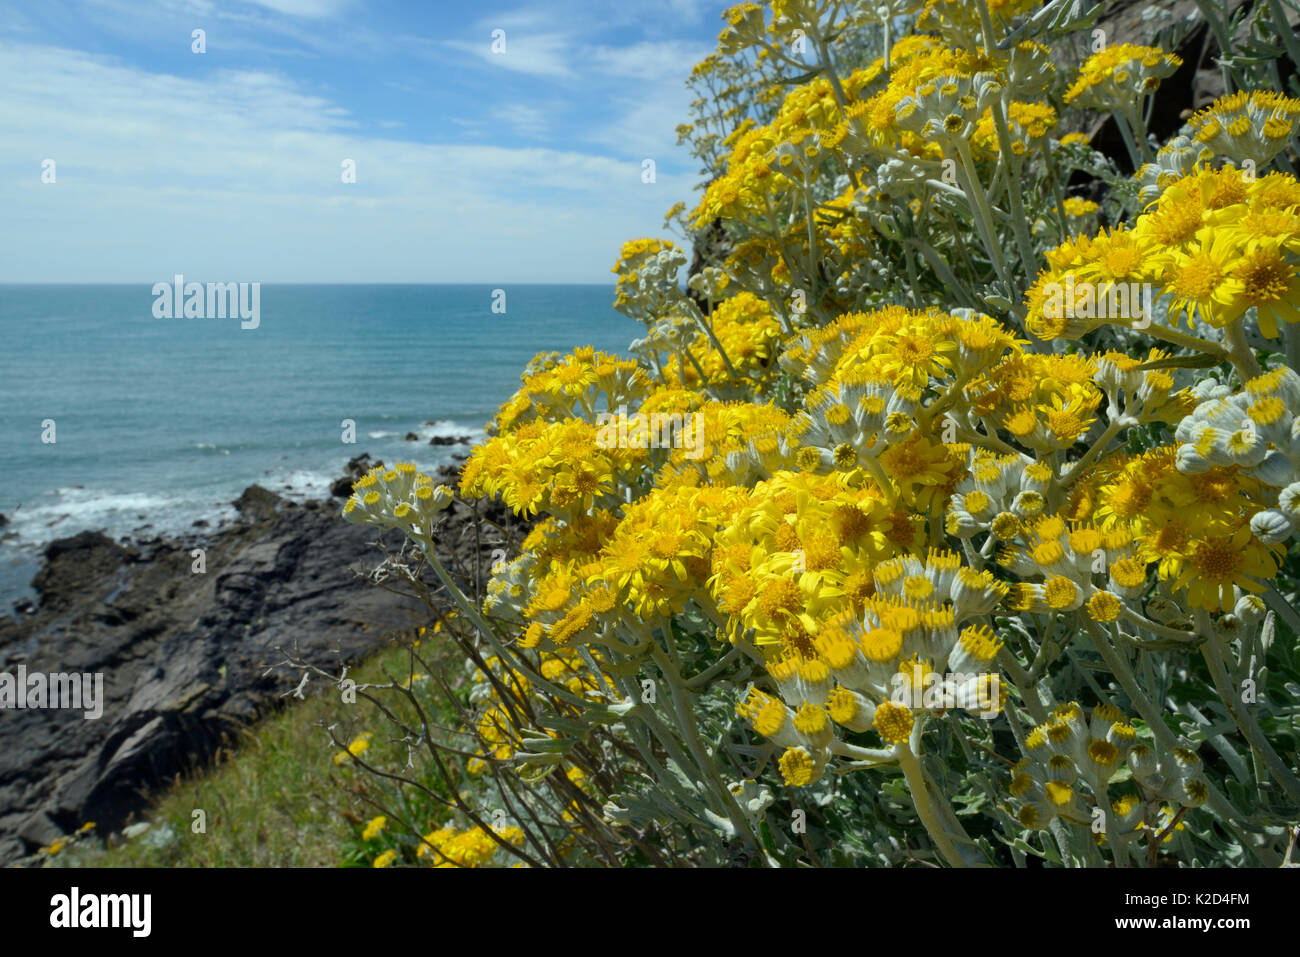 Silver ragwort / Dusty Miller (Jacobaea maritima / Senecio cineraria), a Mediterranean species becoming naturalised on UK coasts, flowering on a cliff face, Widemouth Bay, Cornwall, UK, June. Stock Photo